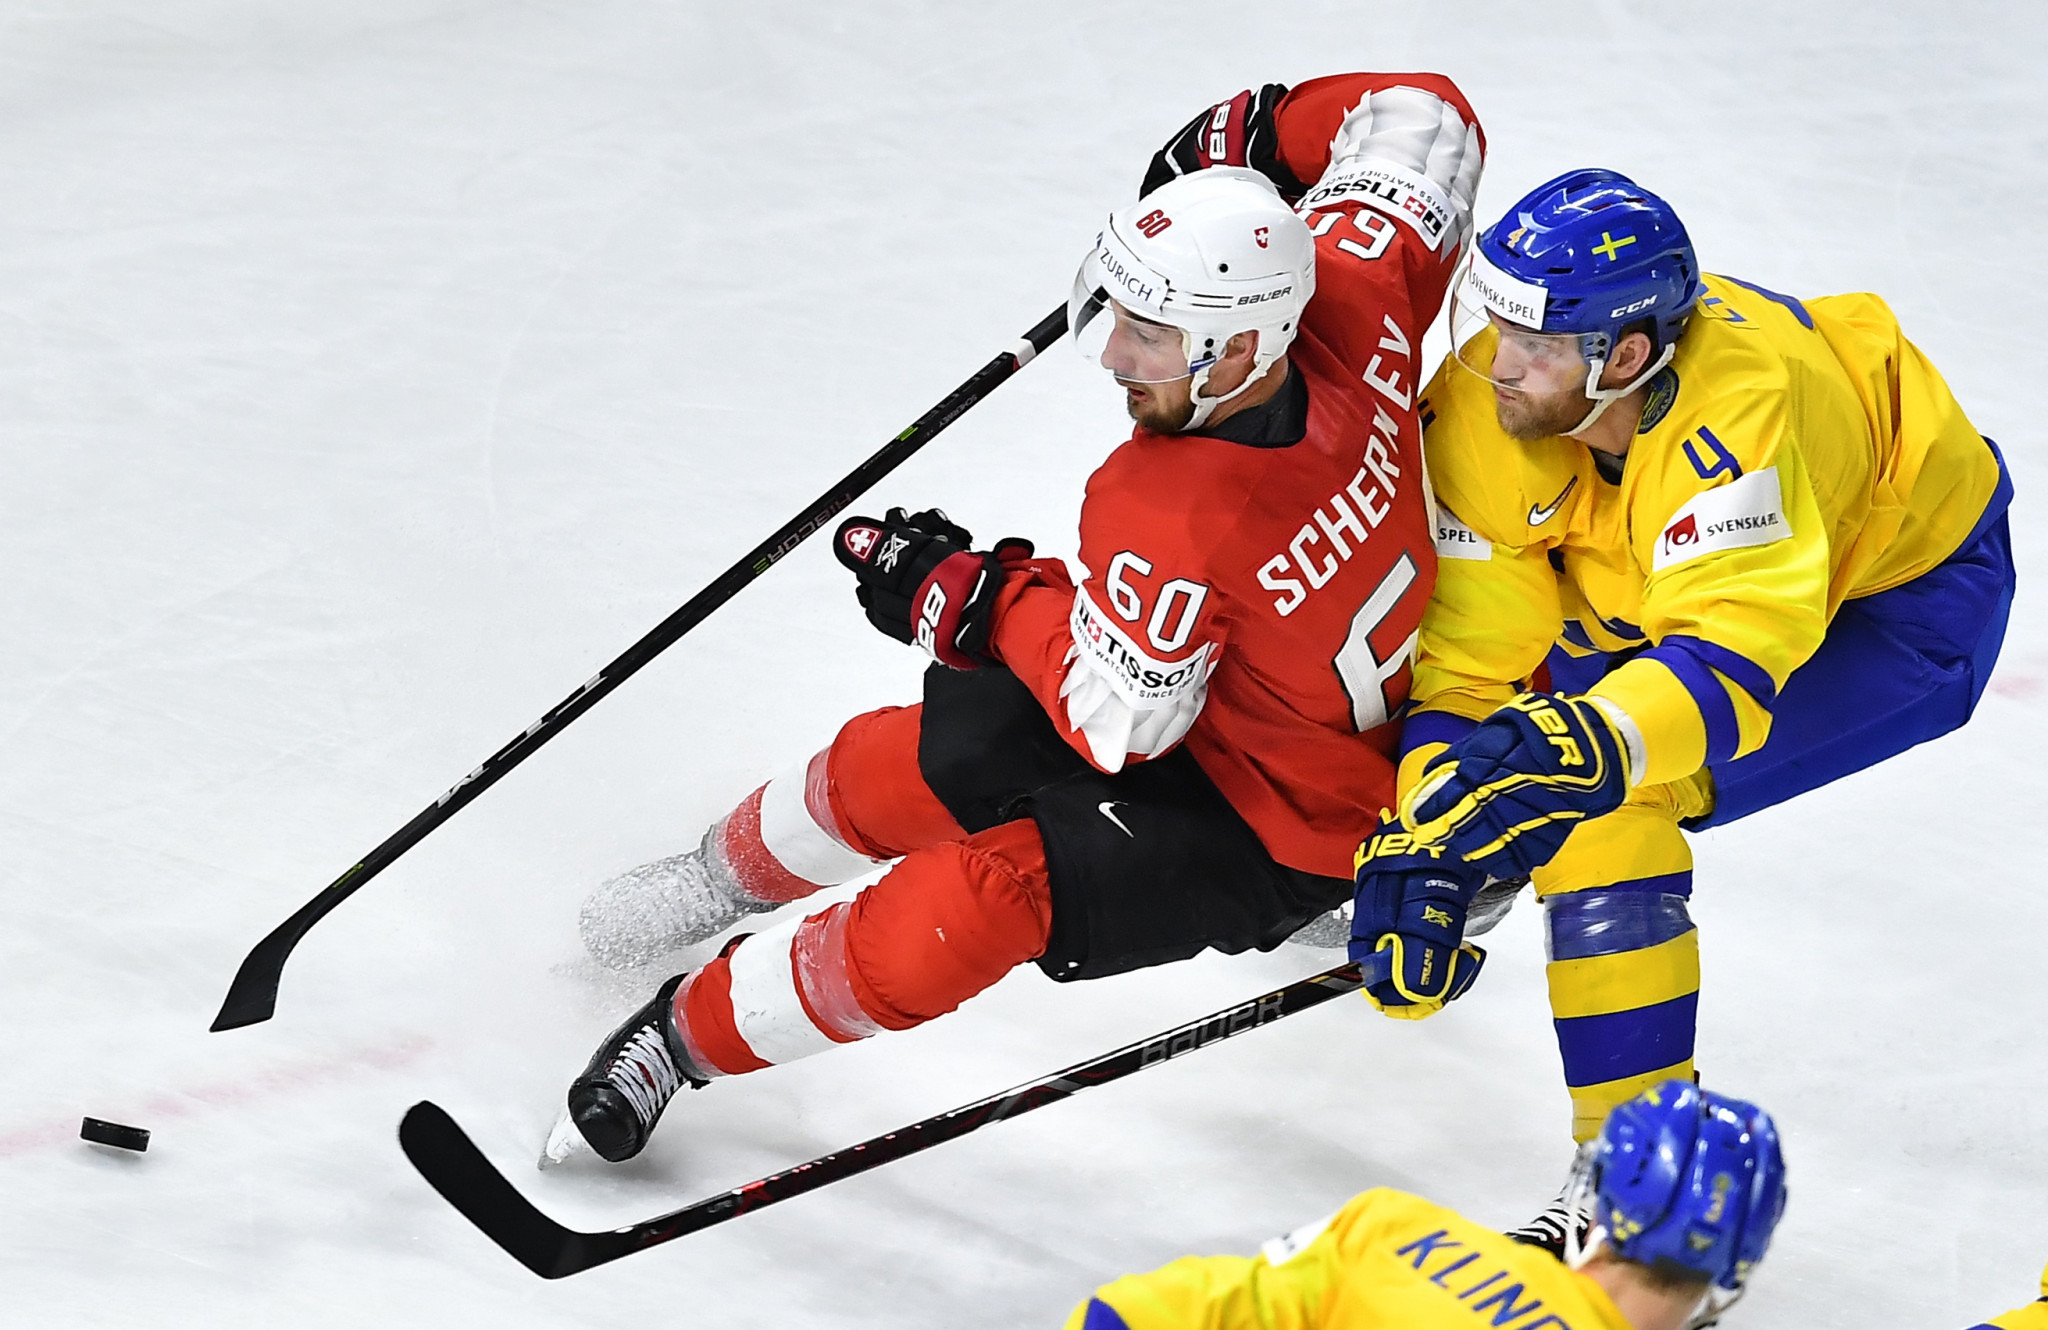 Sweden won the IIHF World Championship by defeating Denmark in the final ©Getty Images